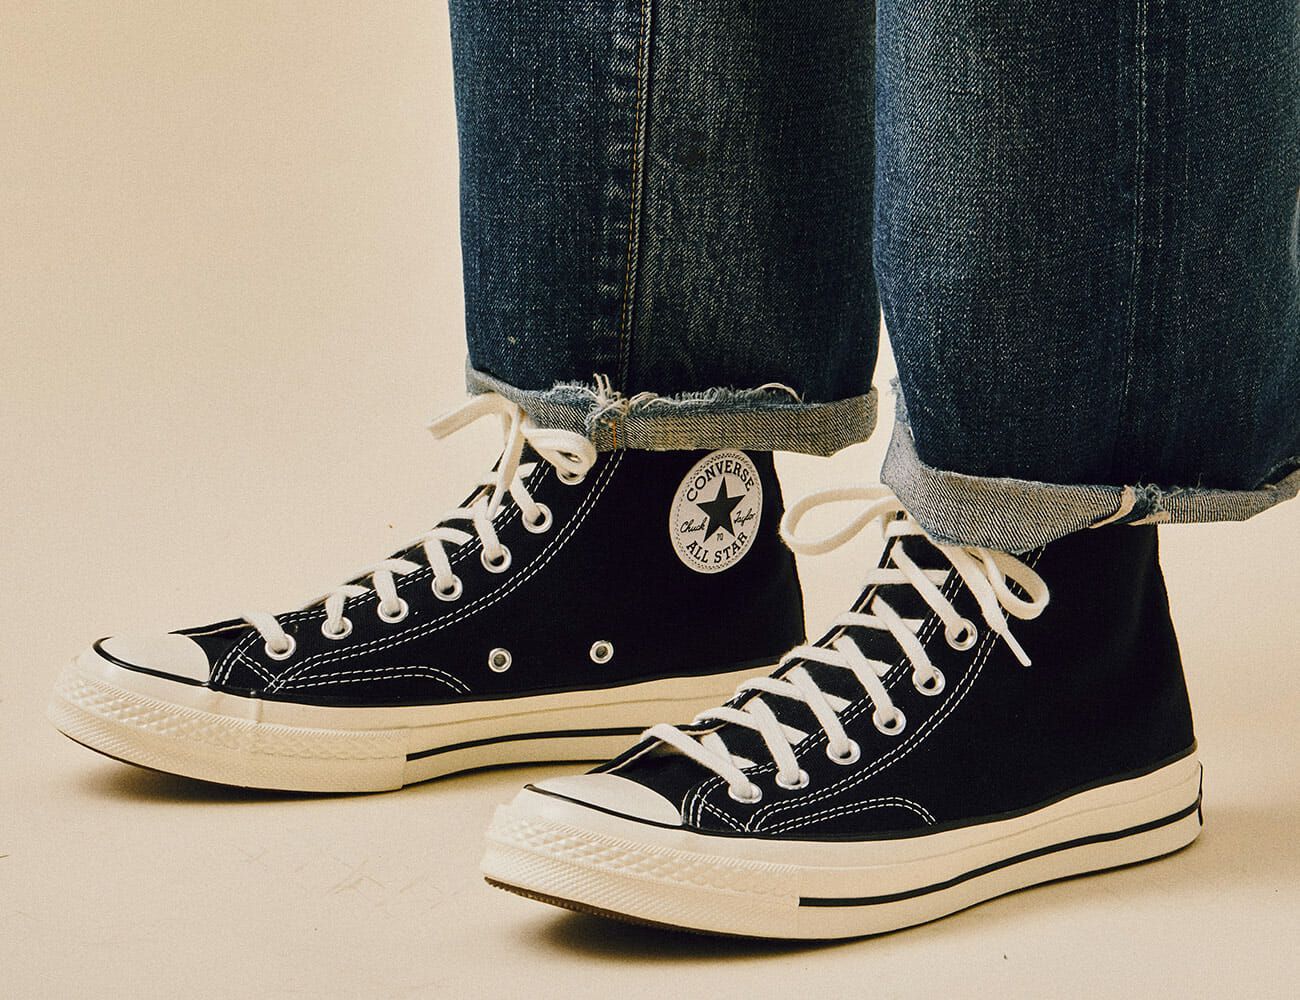 Converse Classic Chucks vs. Chuck 70s: Which Pair Should You Get? شماغ شيروتي